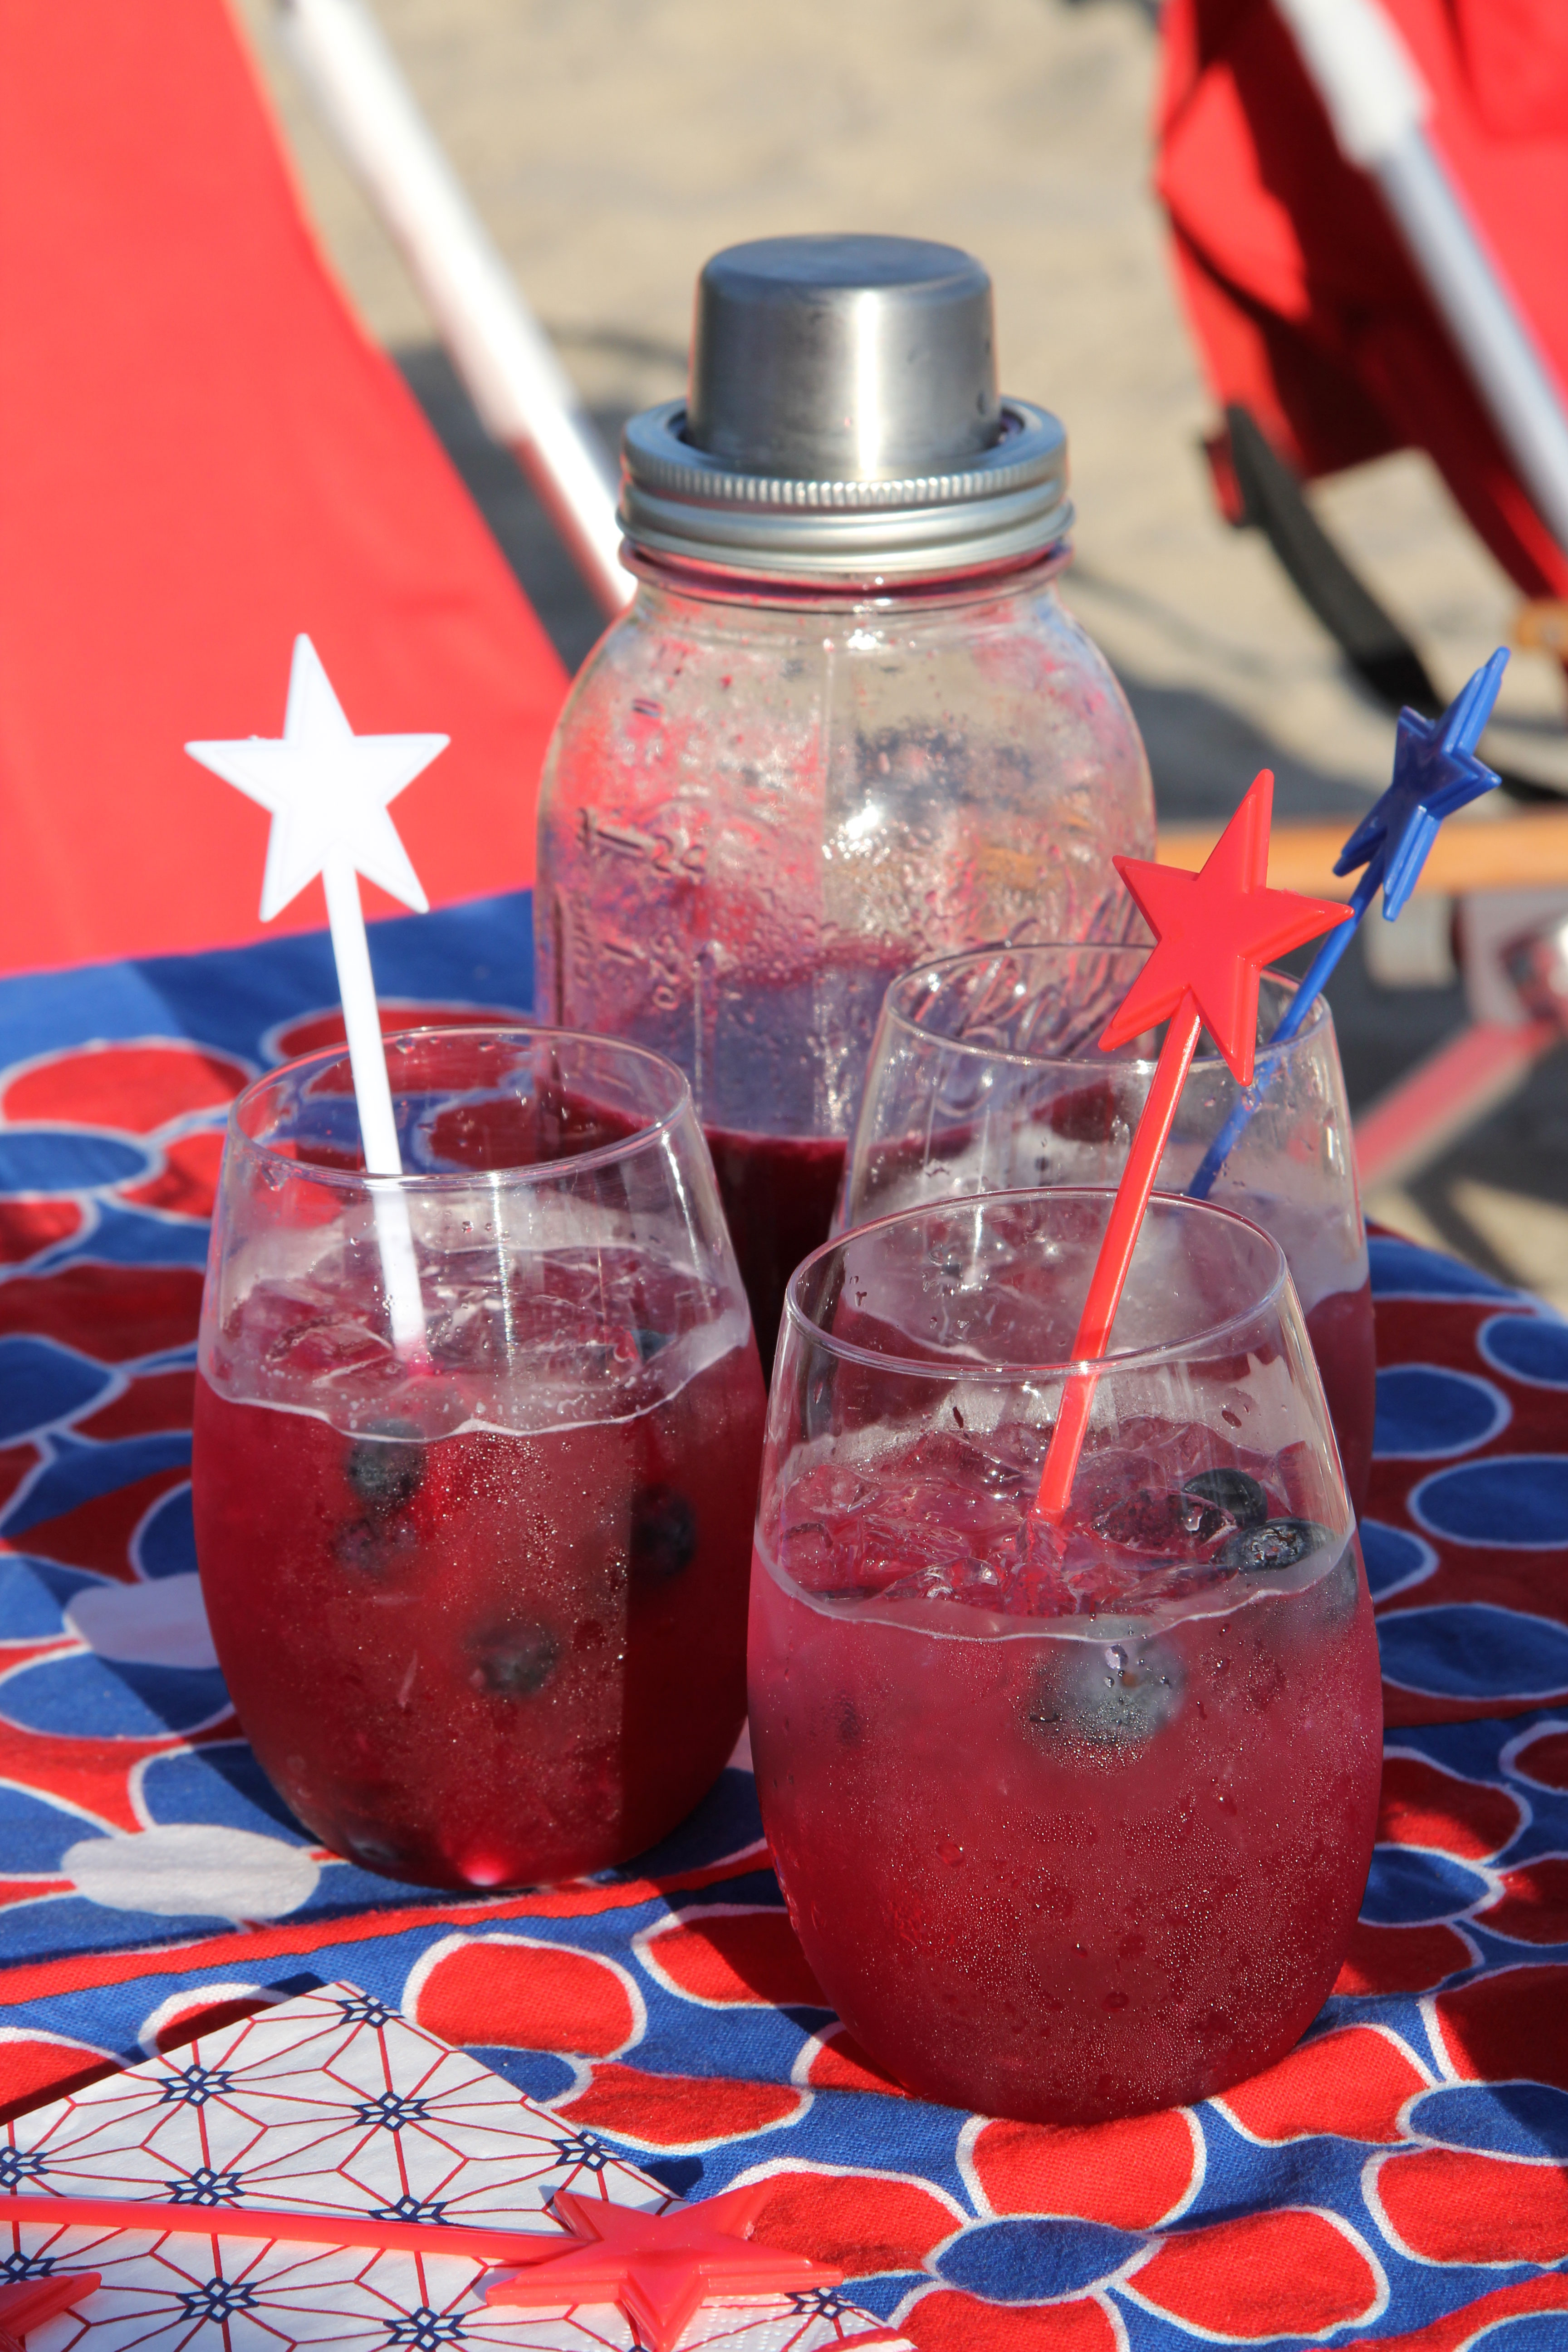 Serve up these fun Spiked Blueberry Limeade cocktails that taste delicious - looks festive and will quickly disappear! And they are red blue and white for any patriotic theme!